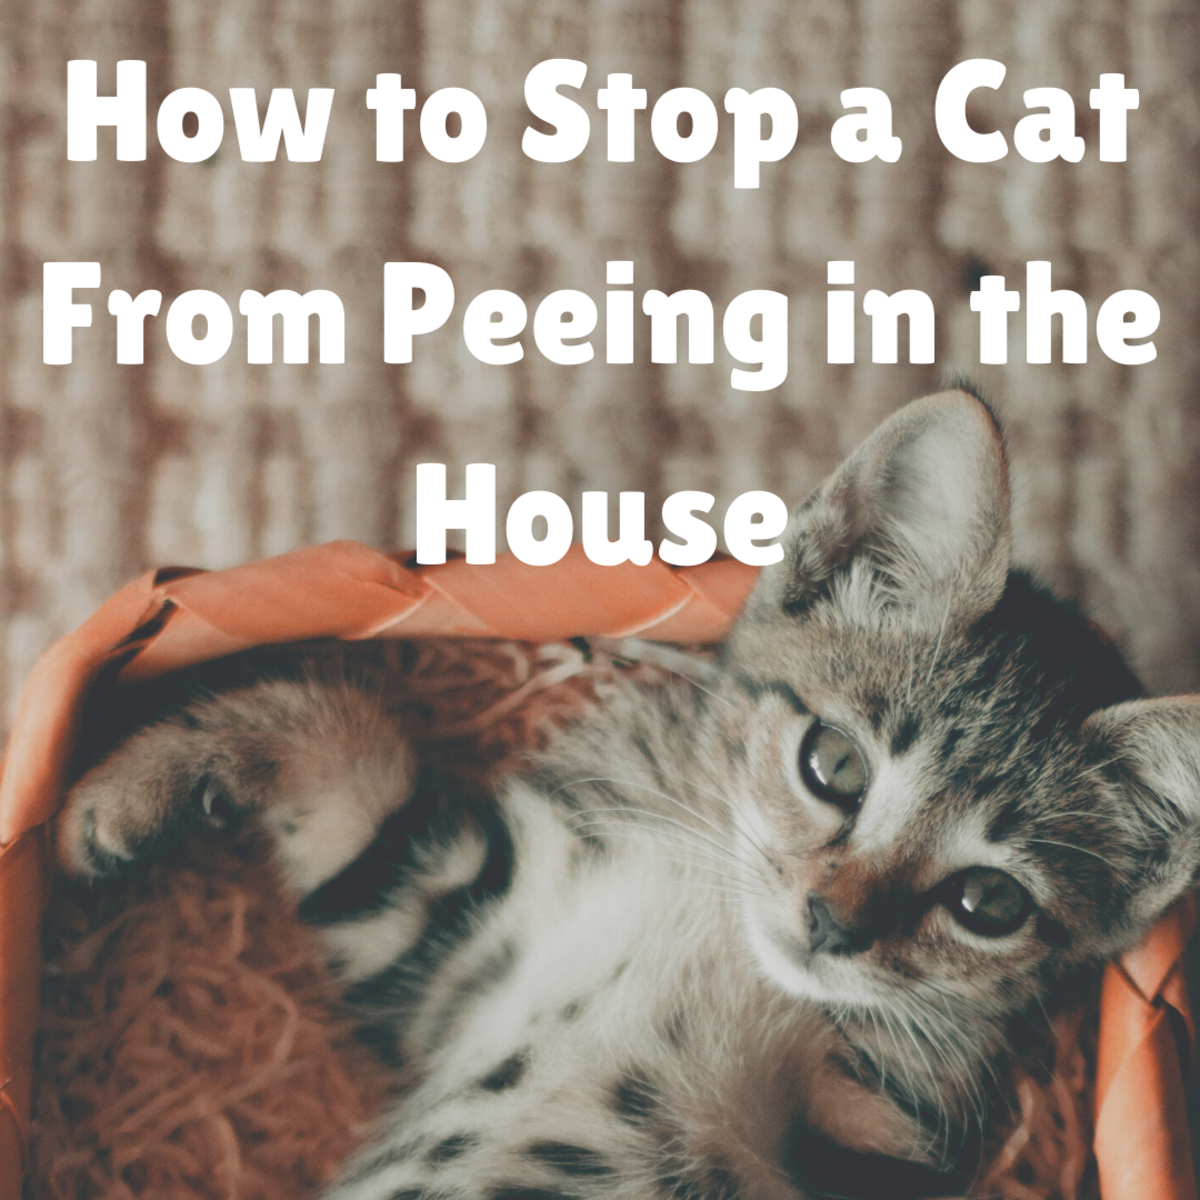 How to Stop a Cat From Peeing in the House